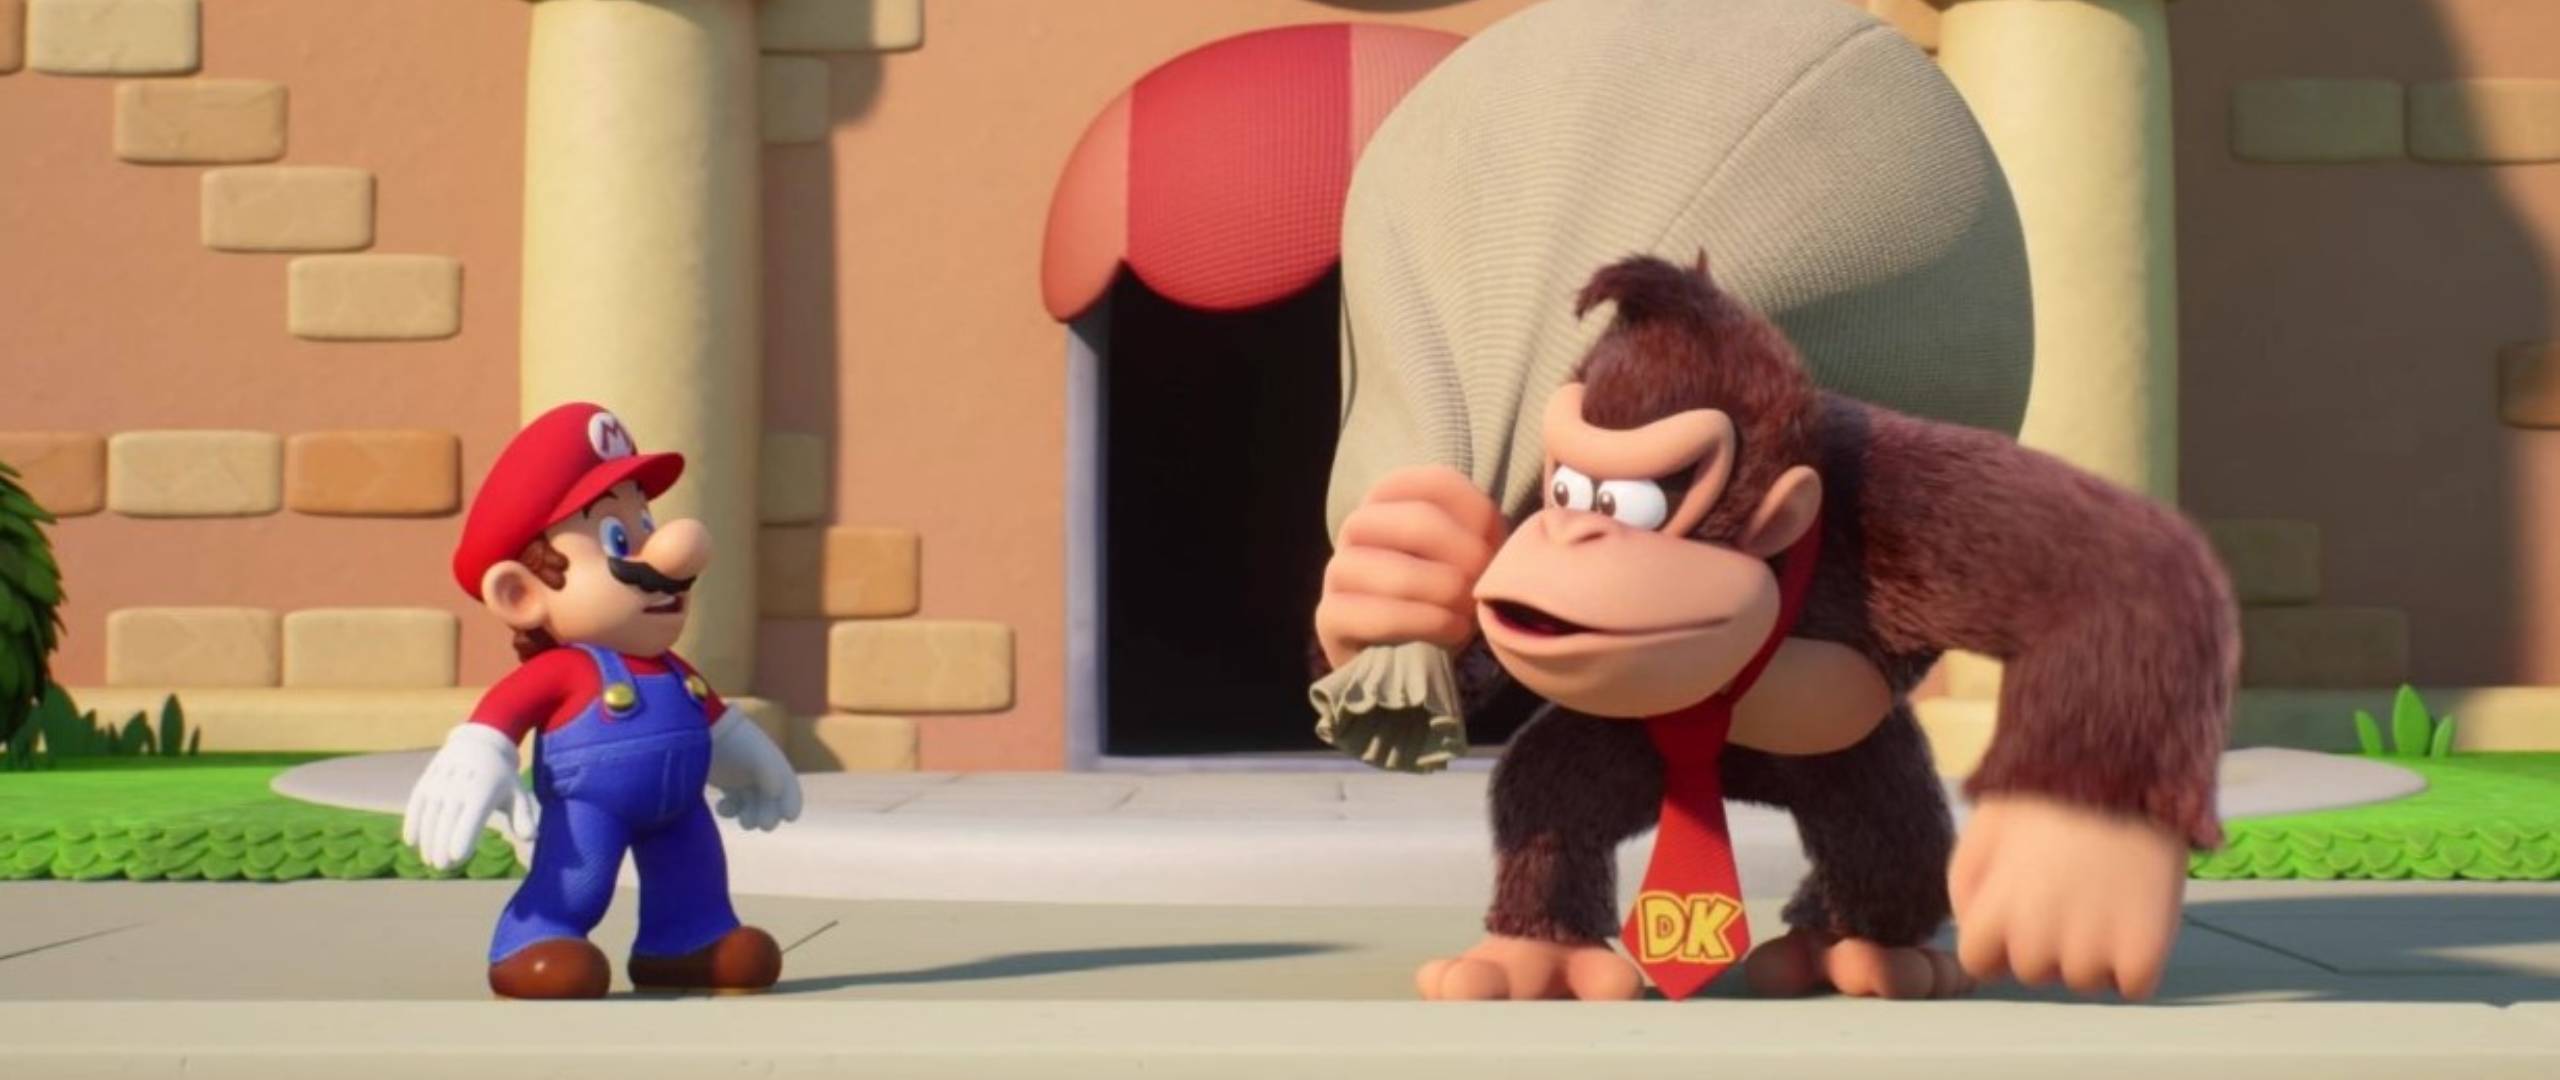 Mario vs. Donkey Kong review - can we skip to the good part?